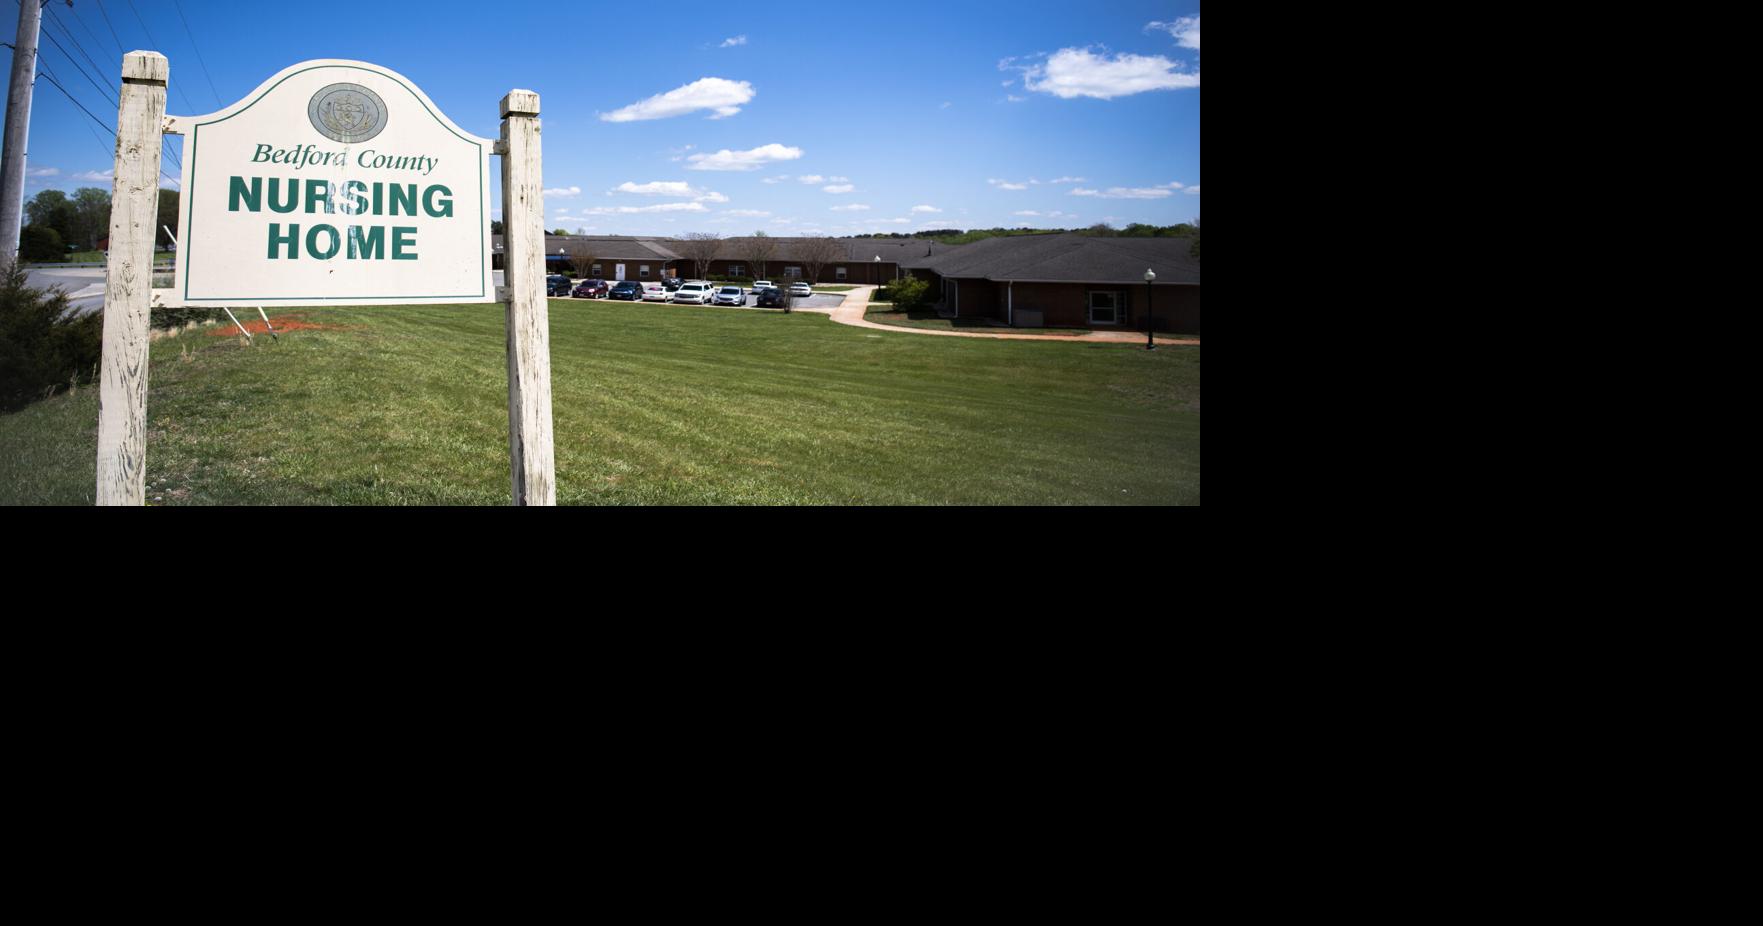 Company withdraws offer to buy Bedford County Nursing Home ...